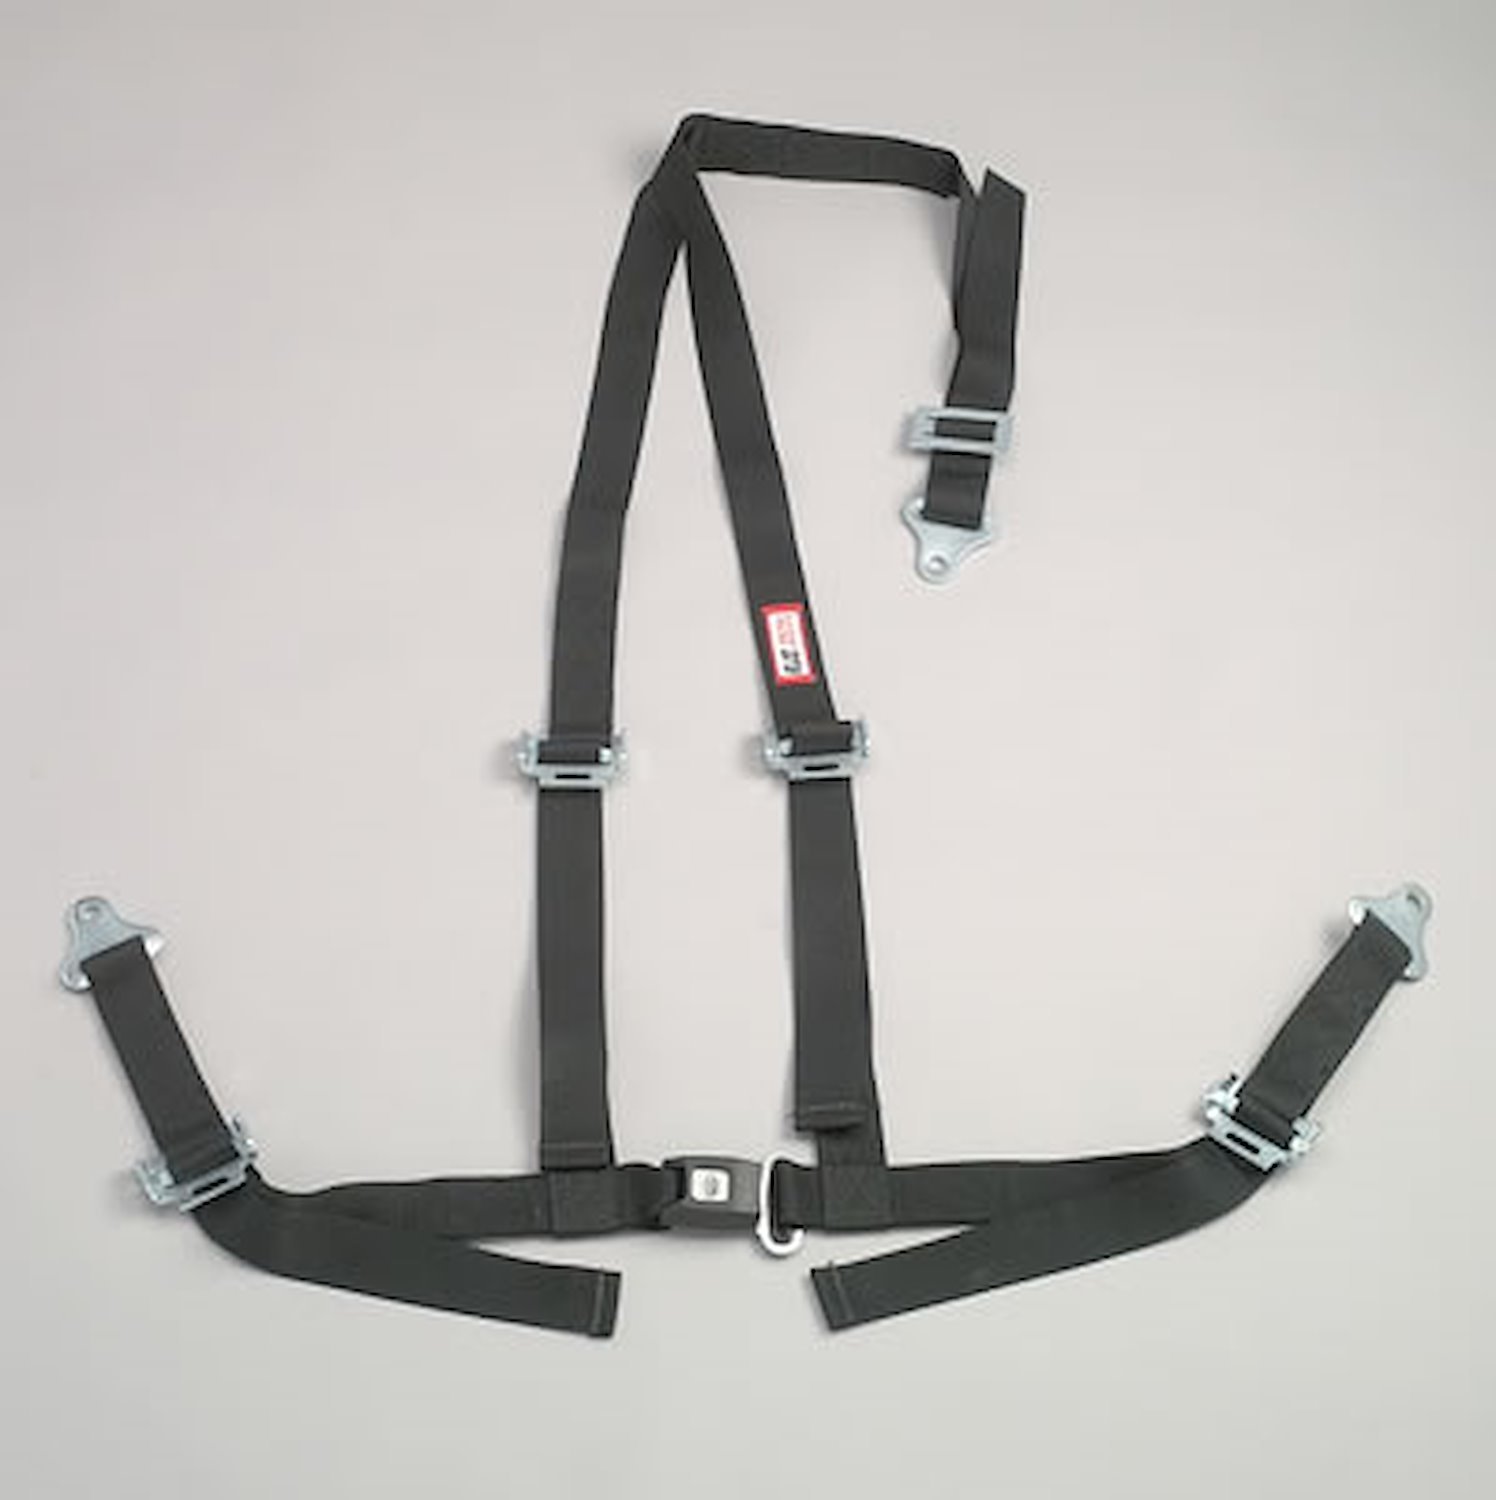 NON-SFI B&T HARNESS 2 PULL DOWN Lap Belt 2 S. H. V ROLL BAR Mount ALL SNAP ENDS w/STERNUM STRAP ORANGE